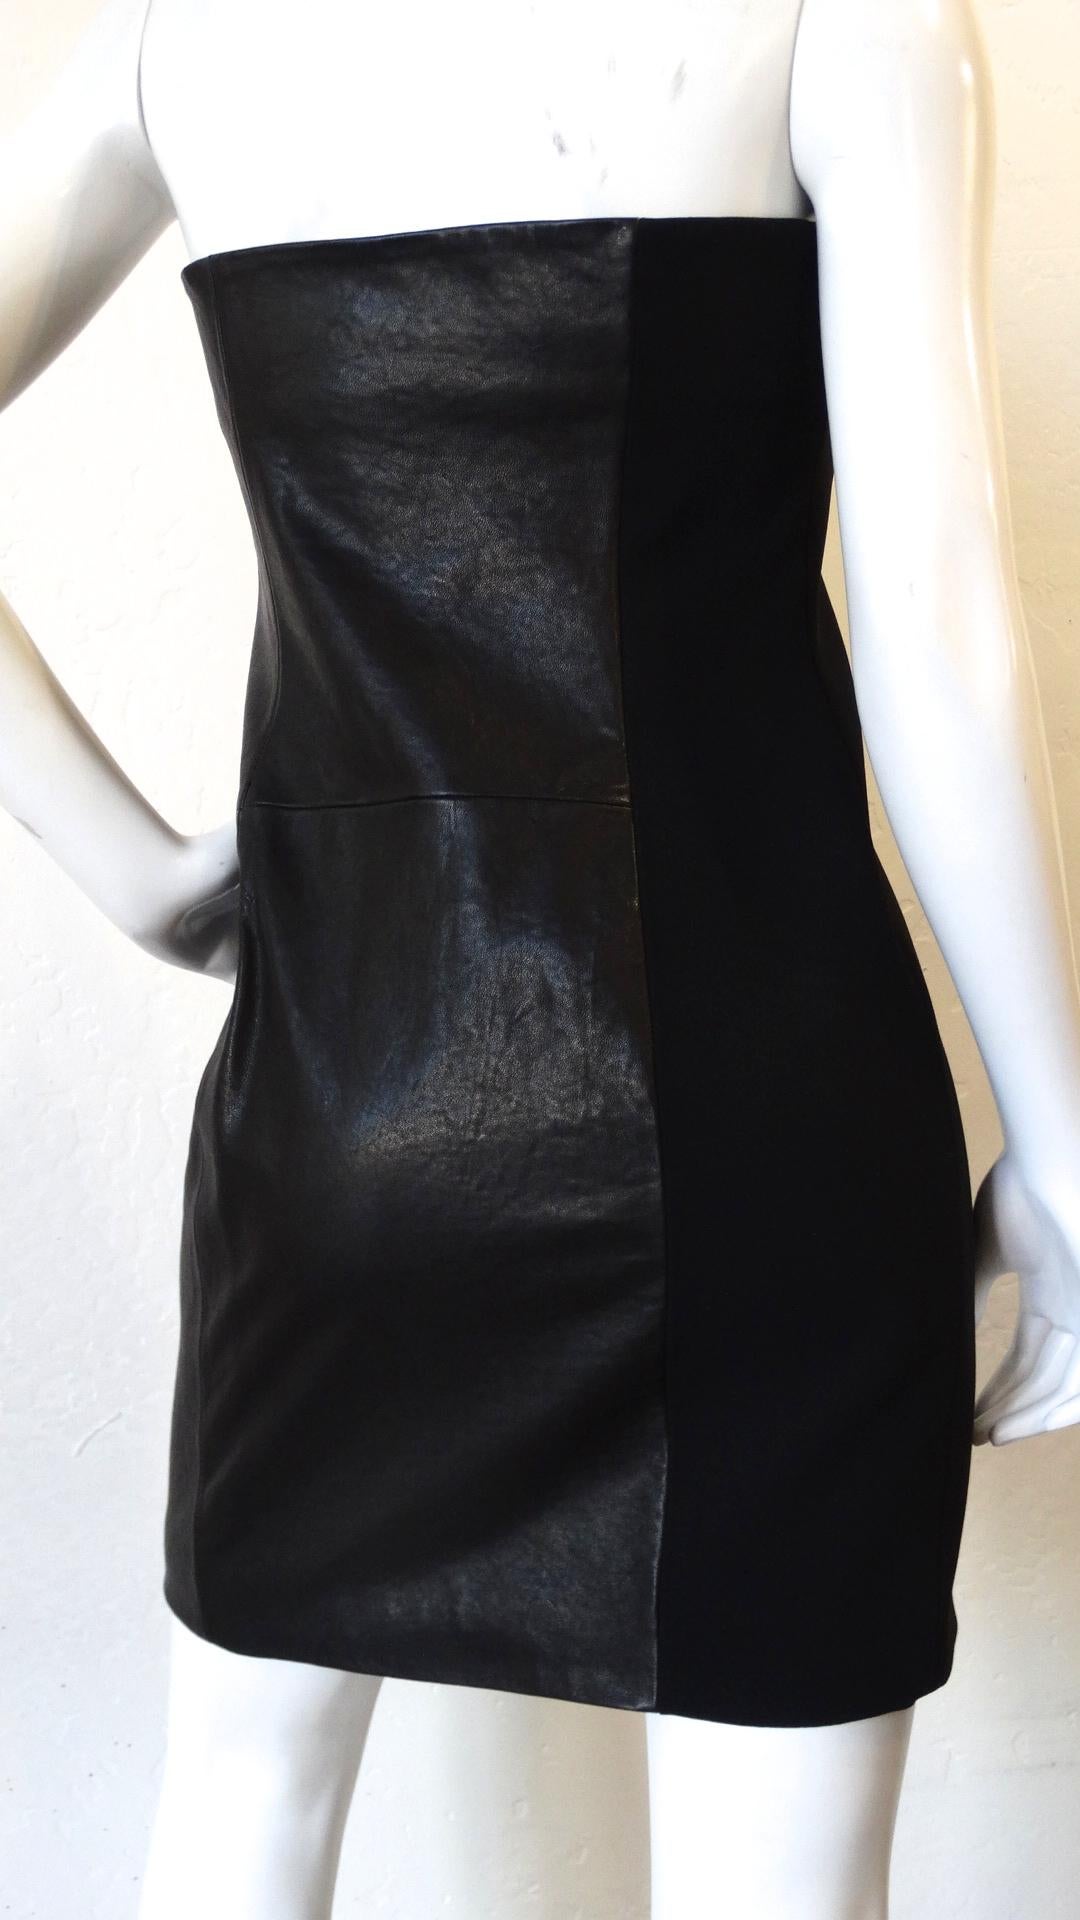 2000s Anthony Vaccarello for Versus Versace Strapless Dress For Sale 4